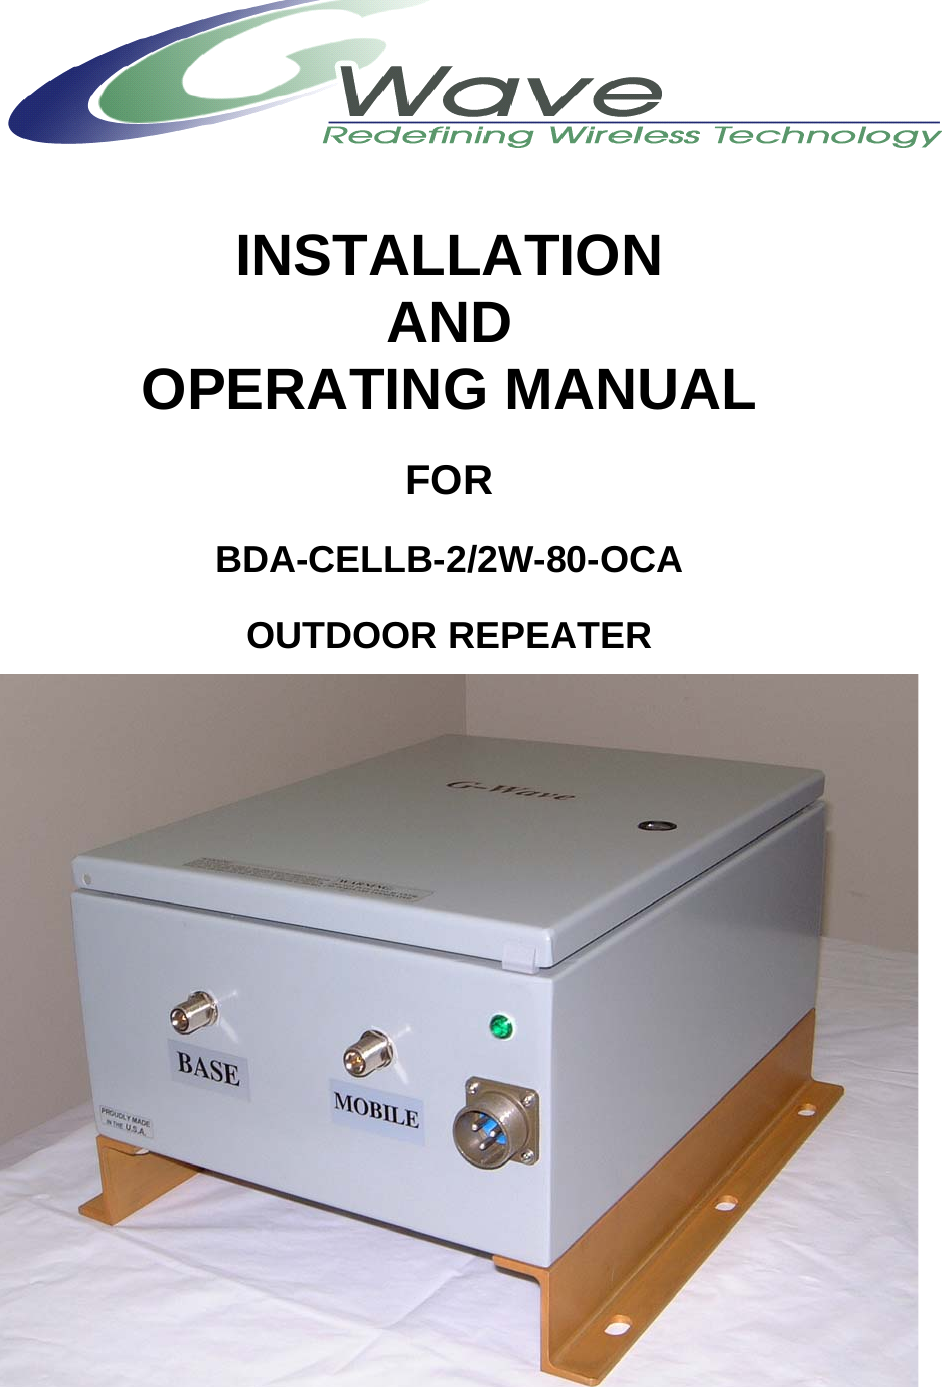  INSTALLATION AND OPERATING MANUAL  FOR  BDA-CELLB-2/2W-80-OCA  OUTDOOR REPEATER  